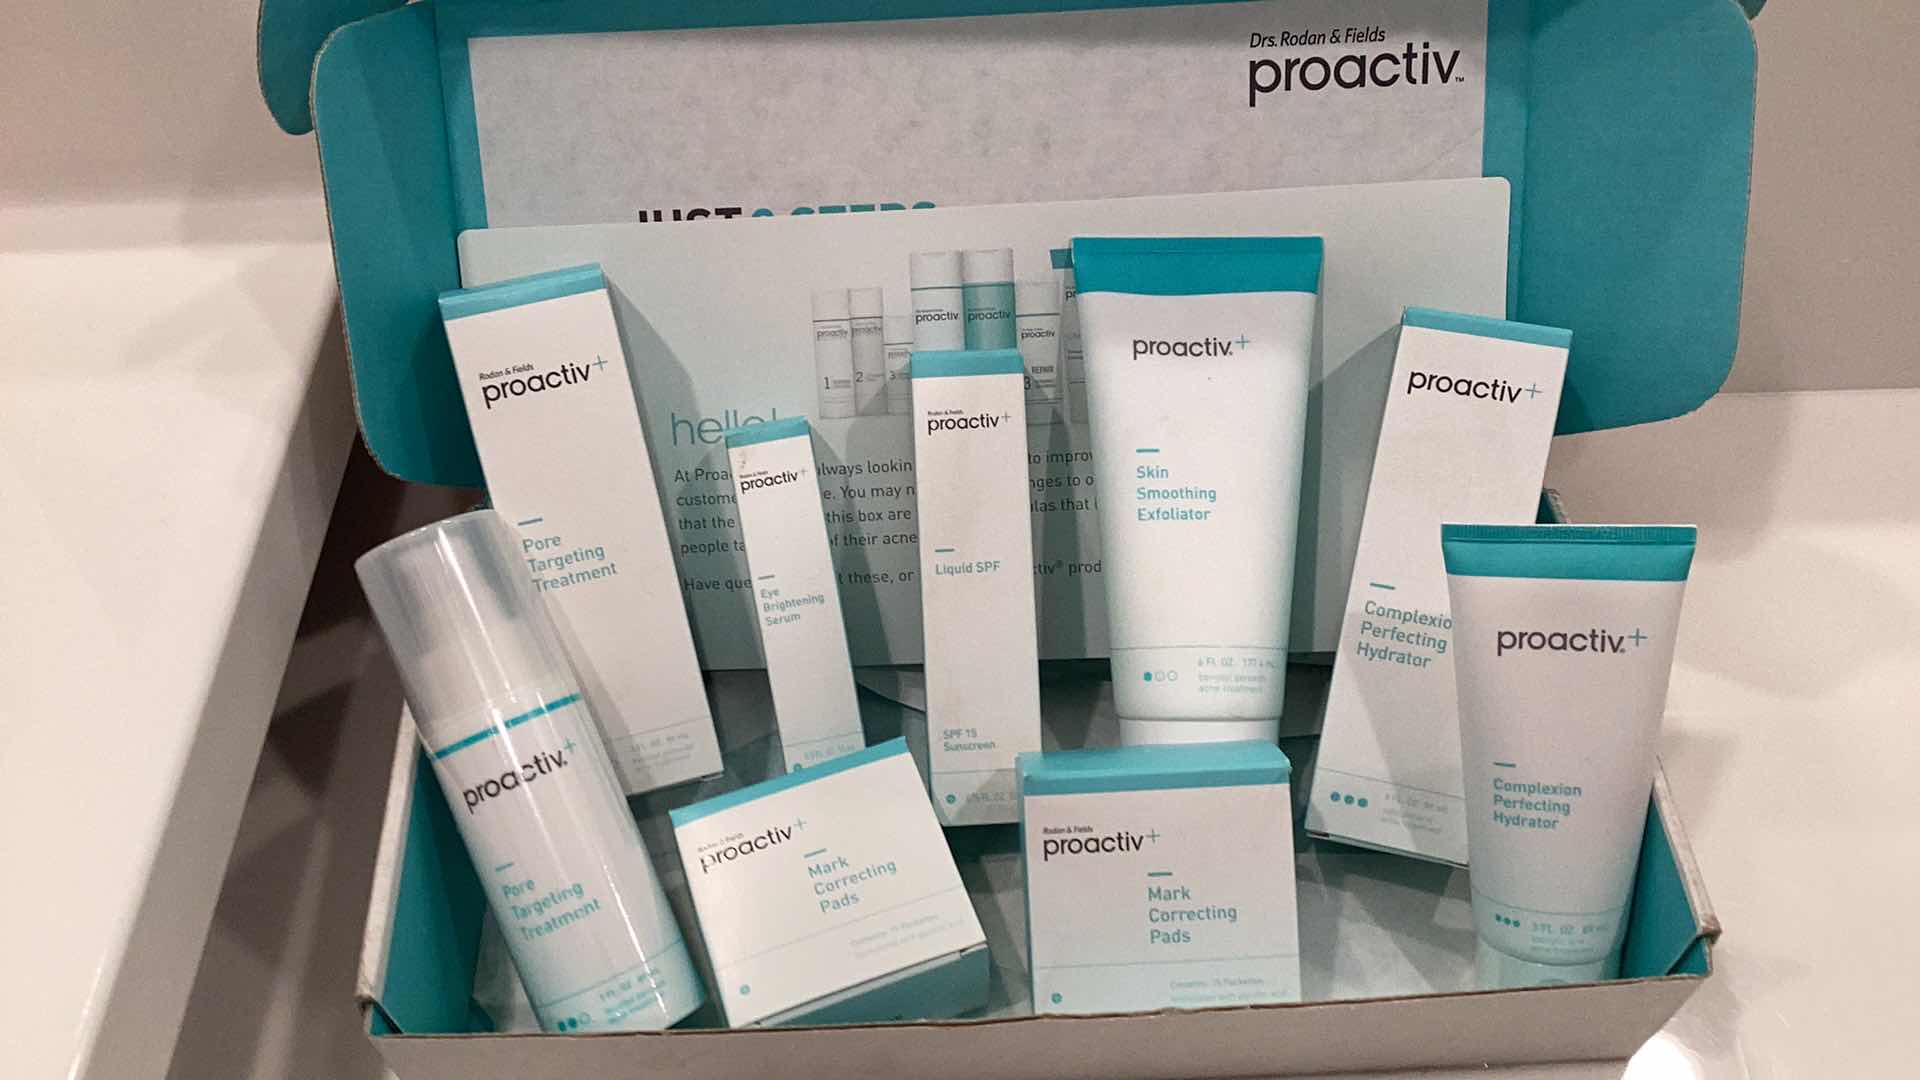 Photo 1 of PROACTIVE EXPIRED BUT FACTORY SEALED INCLUDES COMPLEXION PERFECTING HYDRATOR, SKIN SMOOTHING EXFOLIATOR, MARK CORRECTING PADS, AND OTHER SKIN ESSENTIALS FOR EVERYDAY ROUTINE. - 